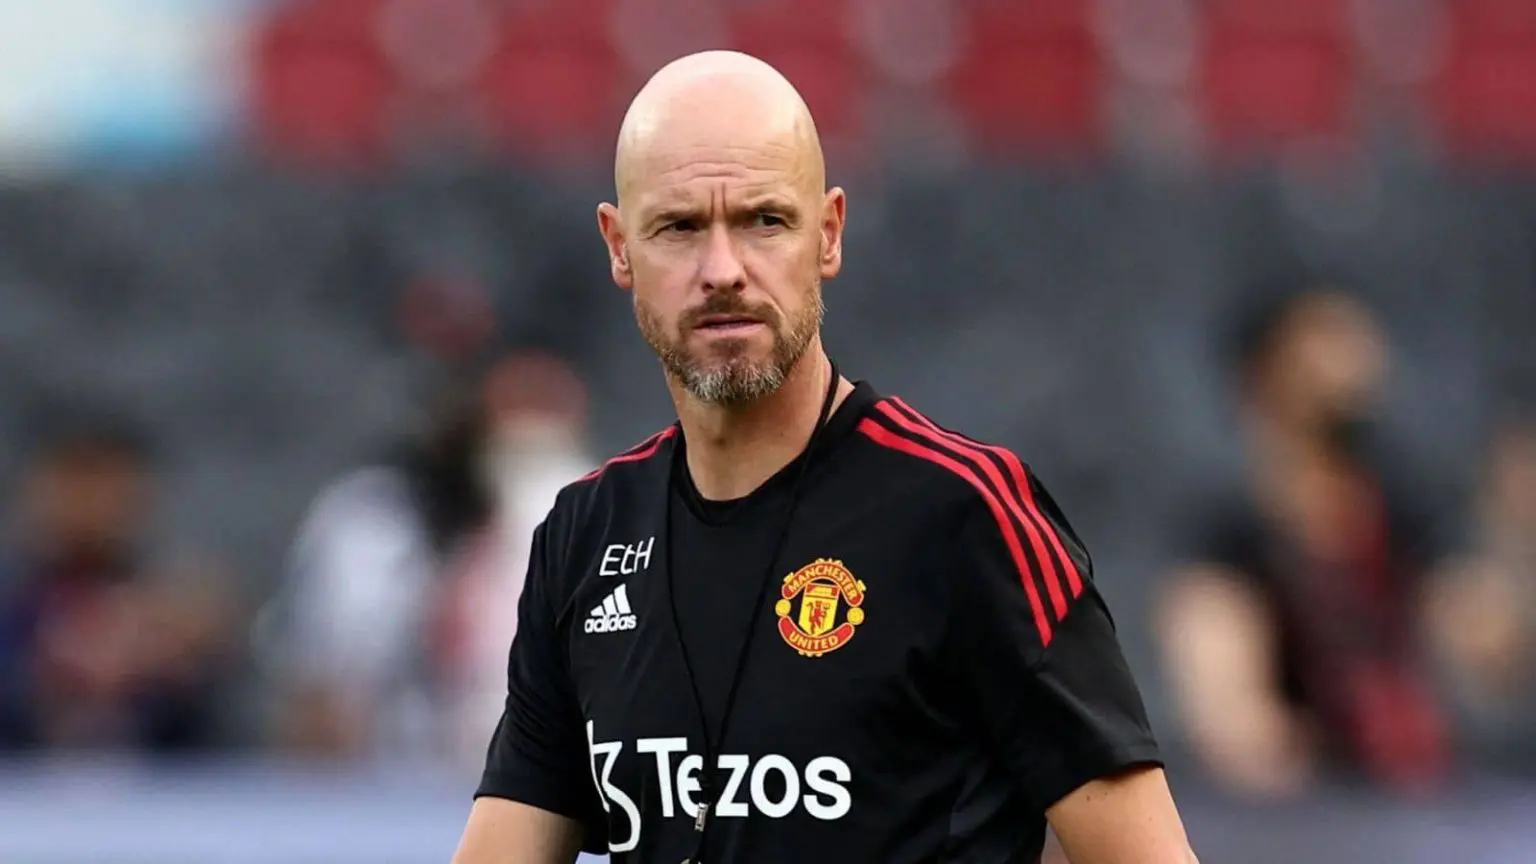 EPL: Ten Hag gives three conditions to sign new Man Utd contract